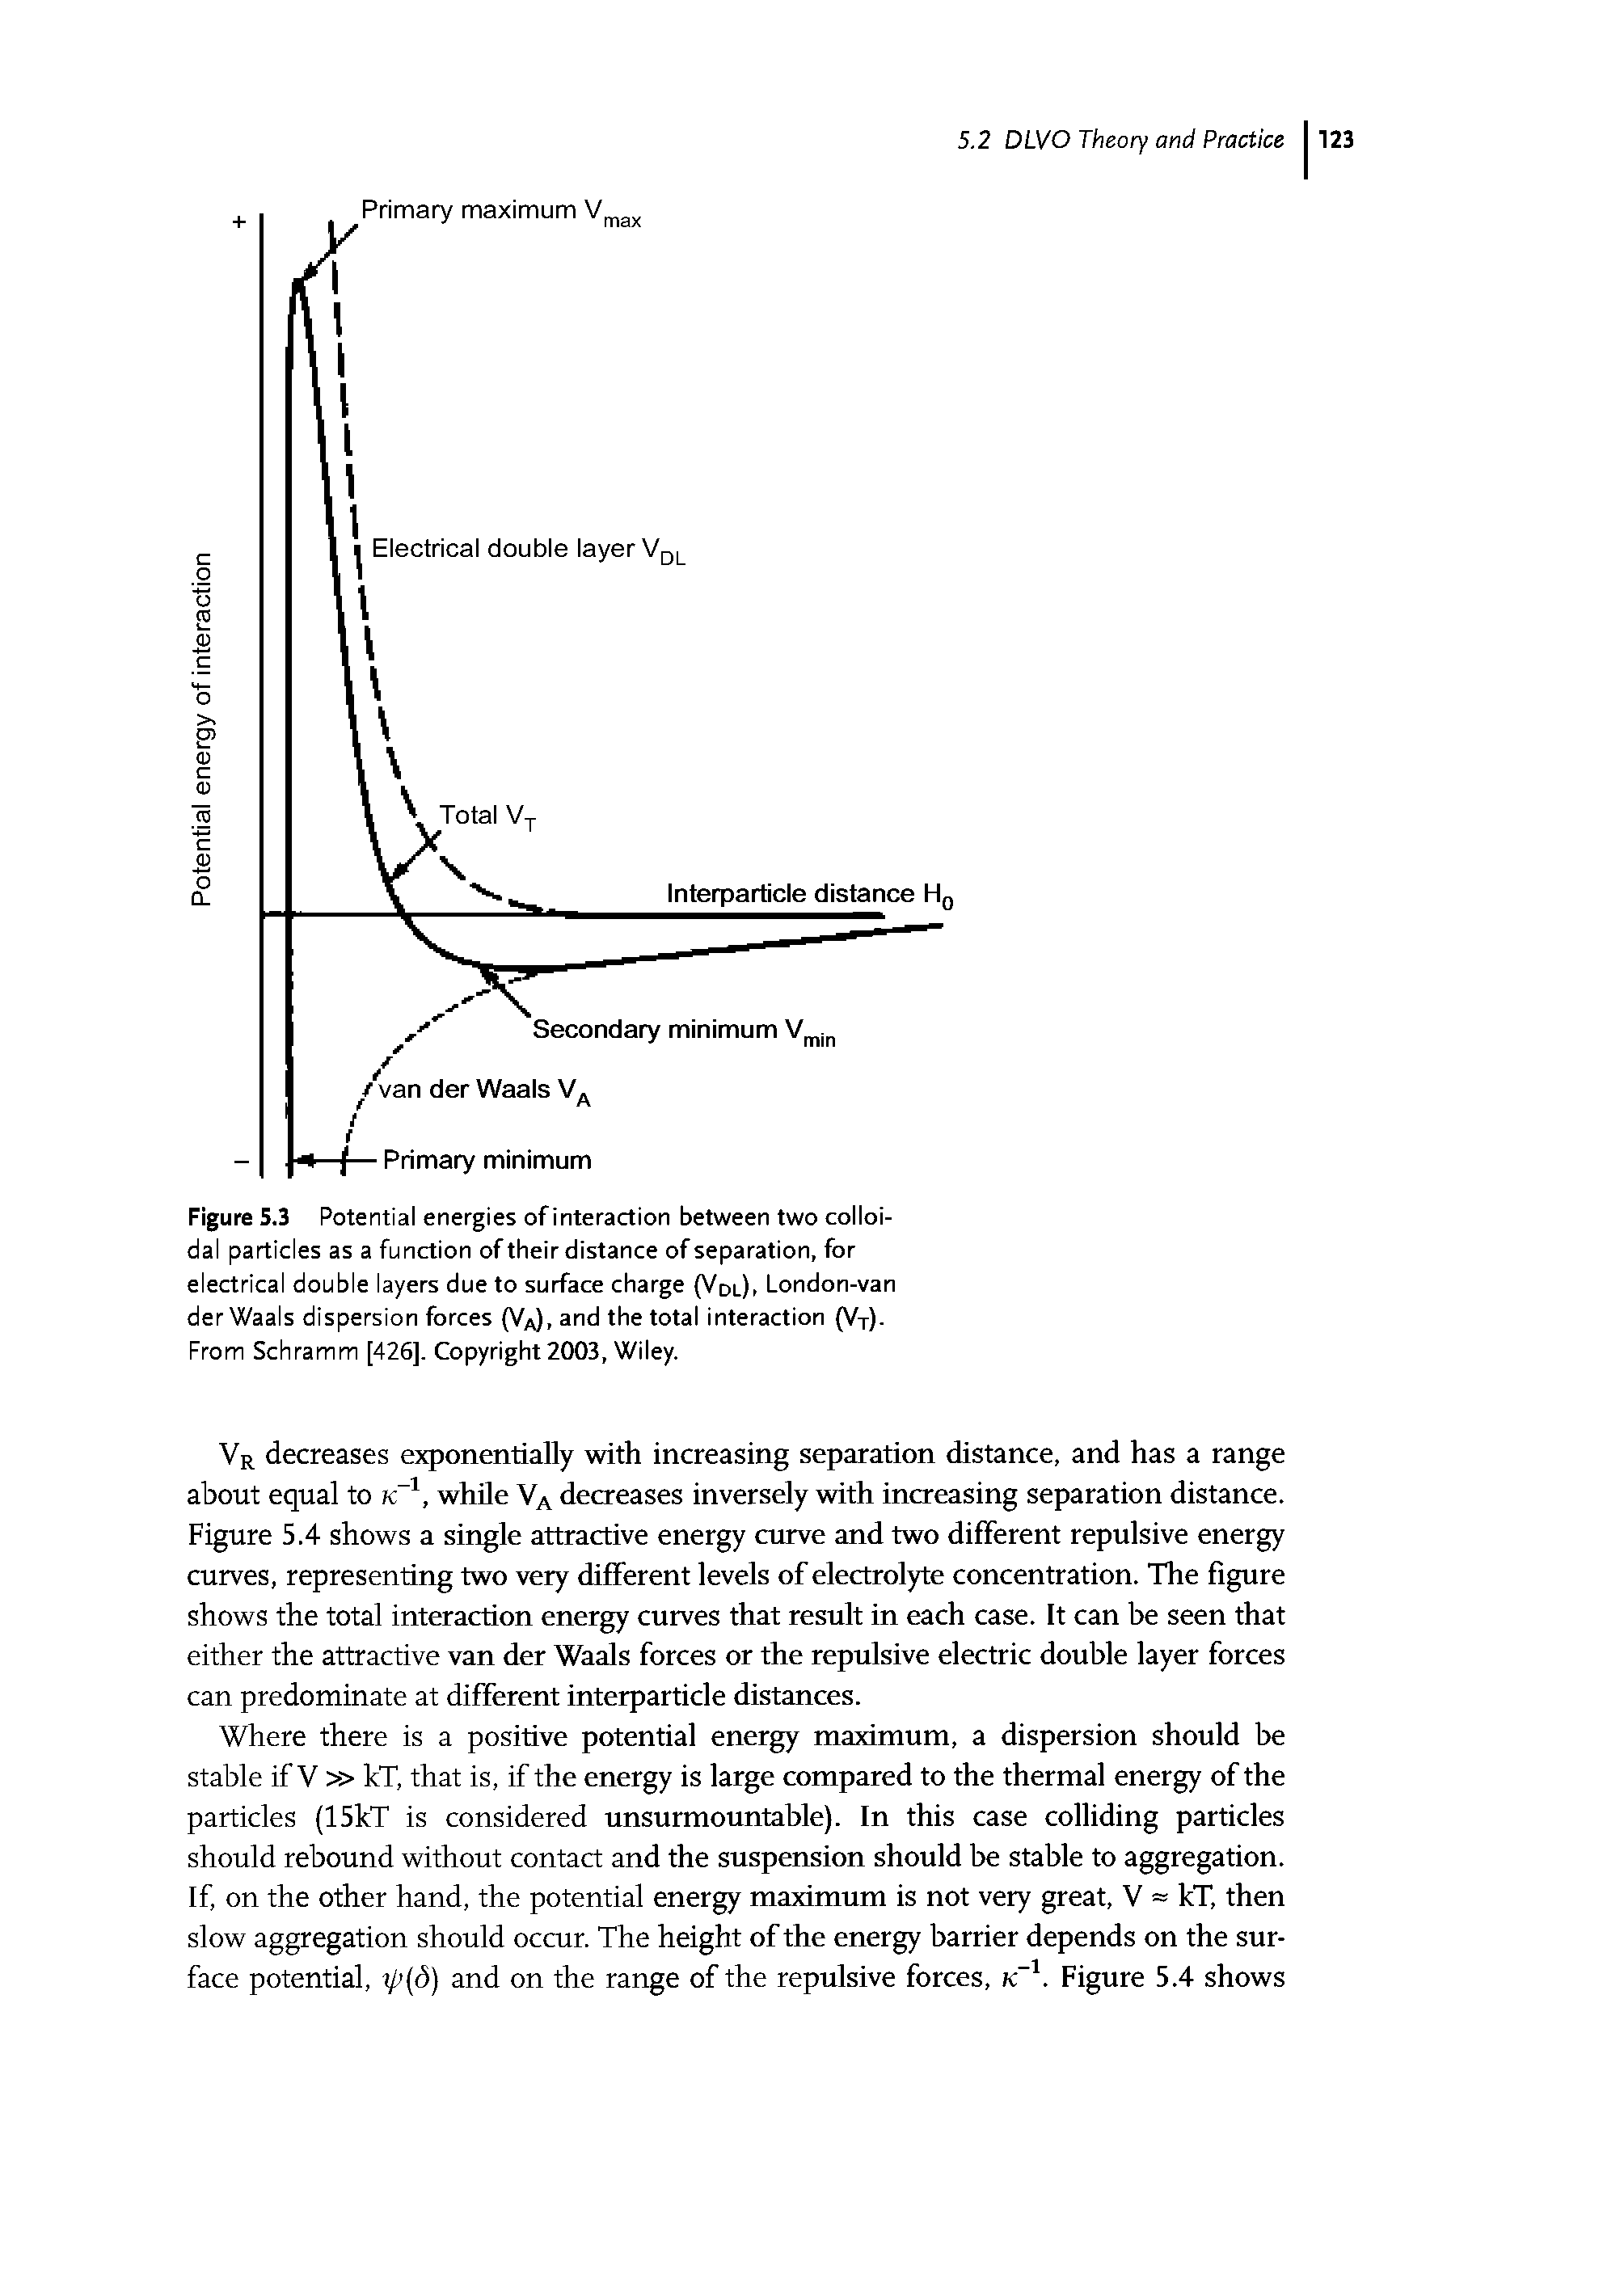 Figure S.3 Potential energies of interaction between two colloidal particles as a function of their distance of separation, for electrical double layers due to surface charge (VolK London-van der Waals dispersion forces (V ), and the total interaction (VT). From Schramm [426], Copyright 2003, Wiley.